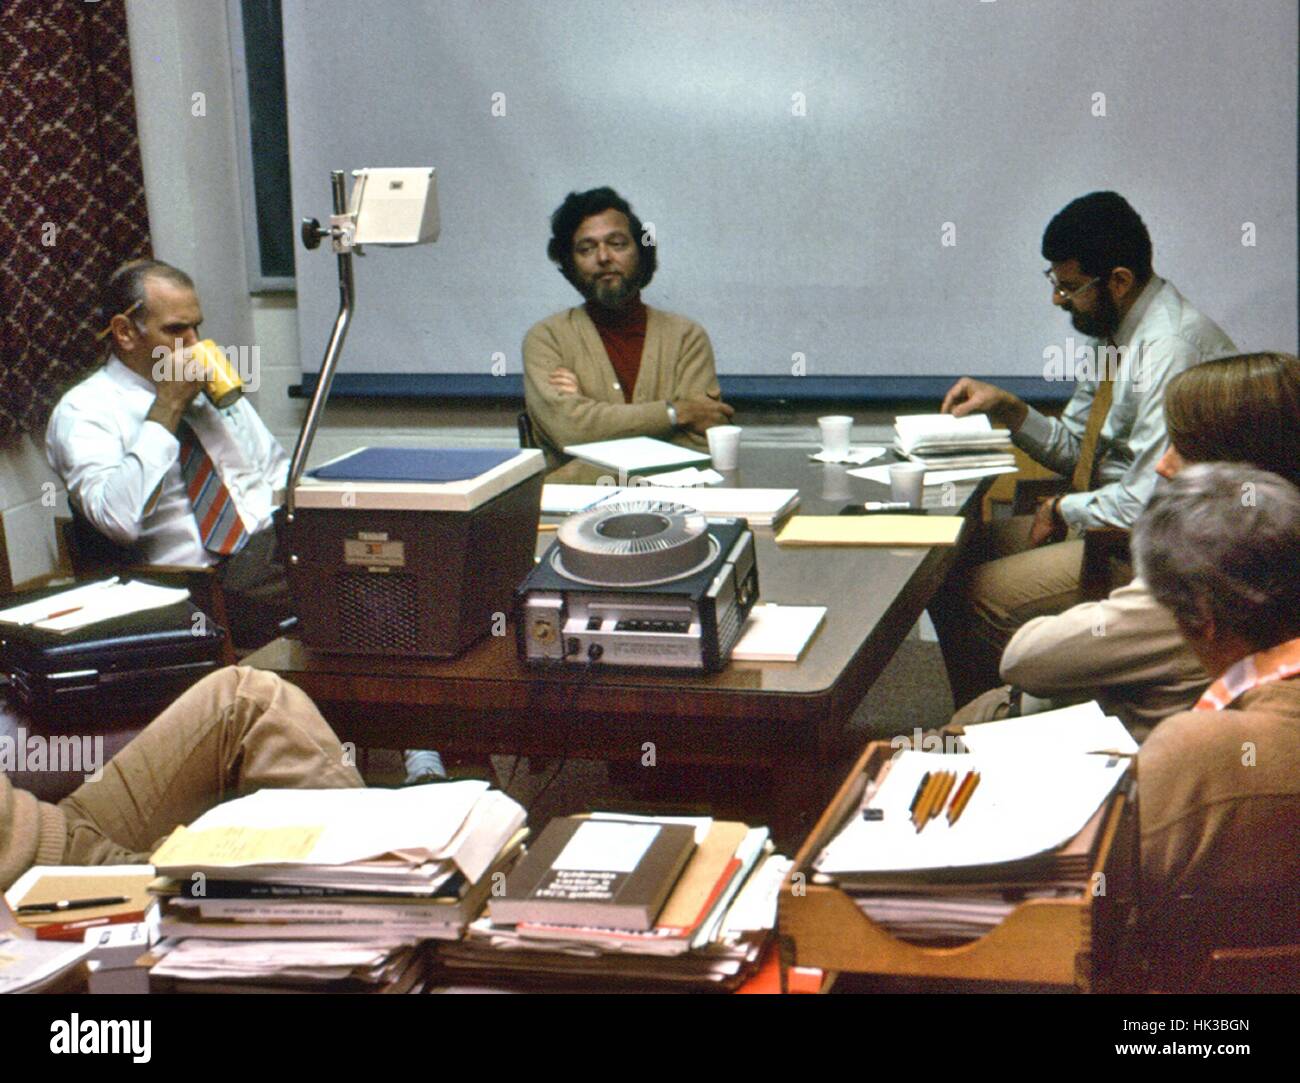 This photograph was taken somewhere in the U.S. during a debriefing held by the Ebola task force after the Zaire outbreak of 1976, 1974. Among the members identified are Centers for Disease Control (CDC) staff, Dr. Karl M. Johnson, (center) and Dr. Joel Breman (right). The Ebola outbreak in Zaire, now known as the Democratic Republic of Congo, started in the town of Yambuku, and from there spread to surrounding areas. A Kinshasa area hospital was sealed off during the outbreak, helping to bring the situation under control. The total number of cases in Zaire was 318 and had a mortality rate of  Stock Photo